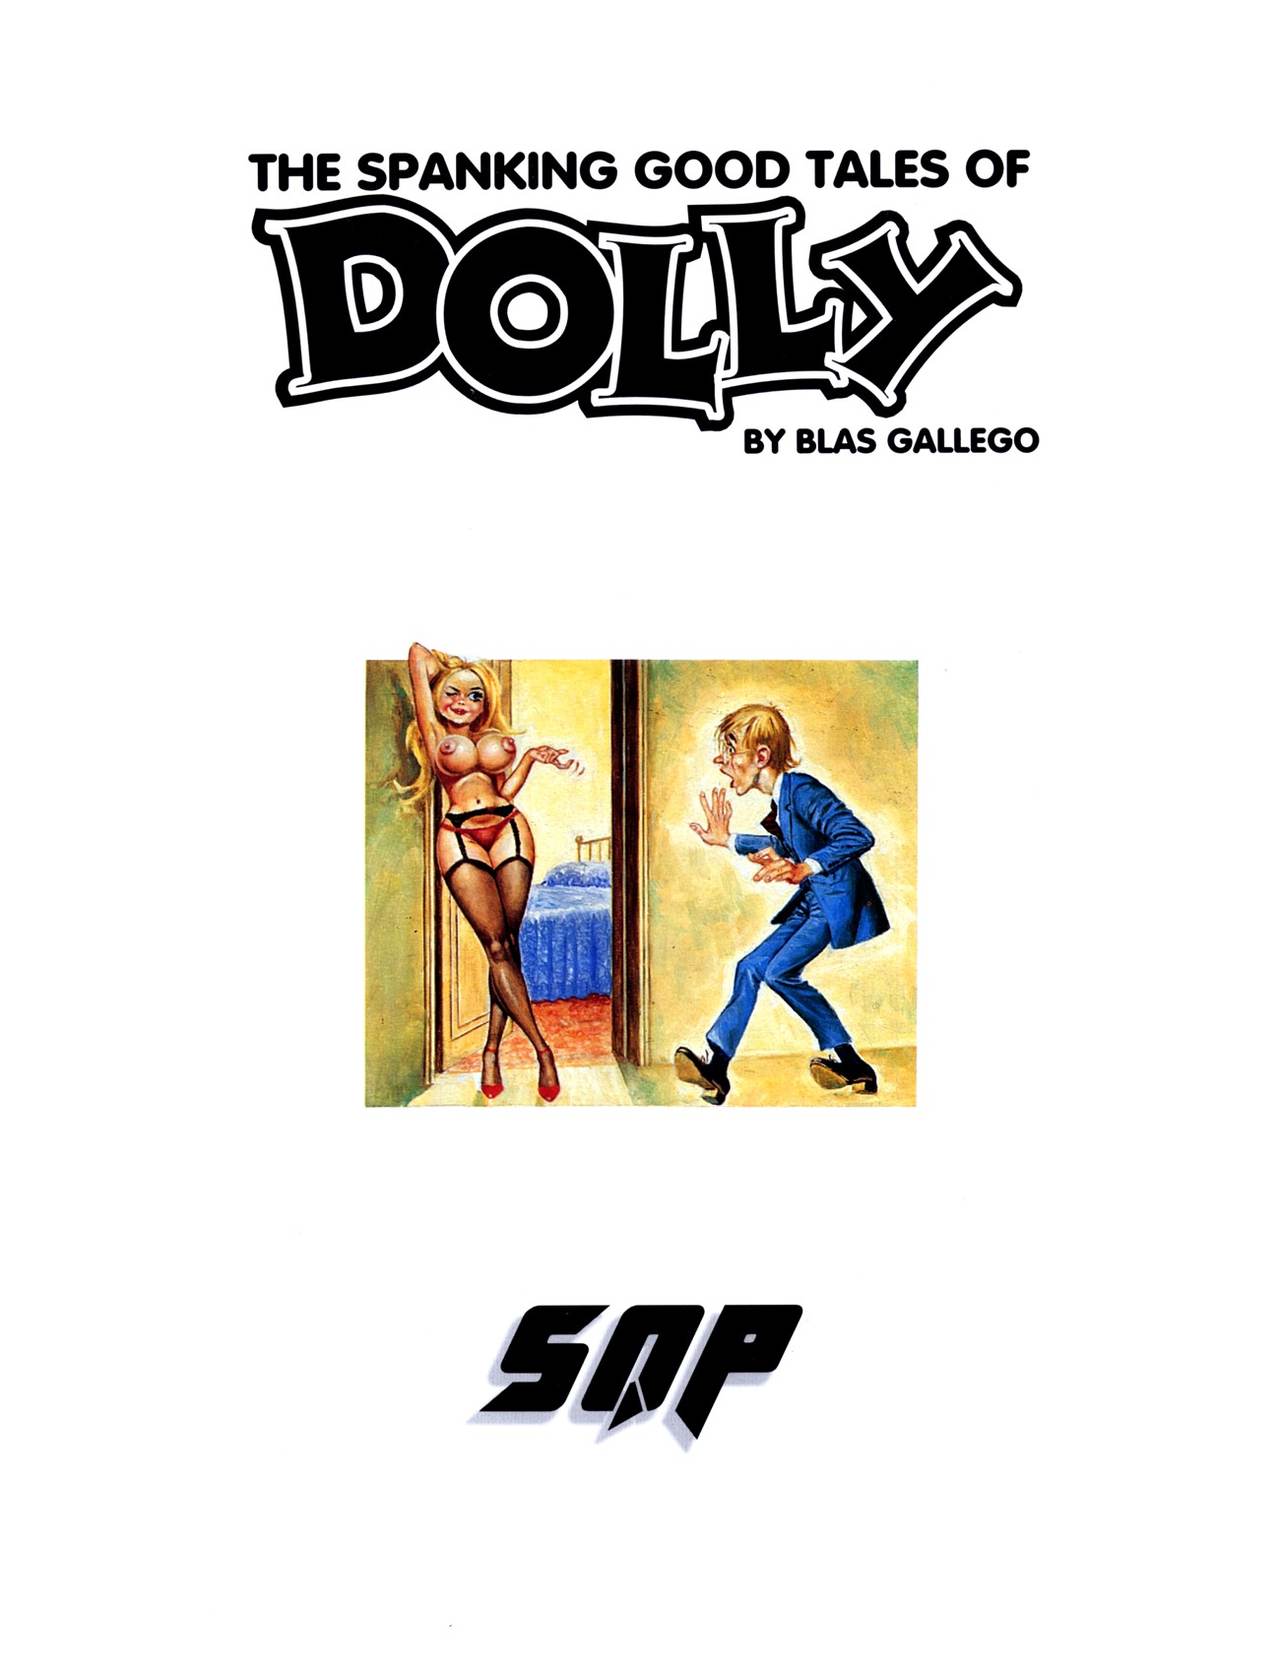 [Blas Gallego] The Spanking Good Tales of Dolly 